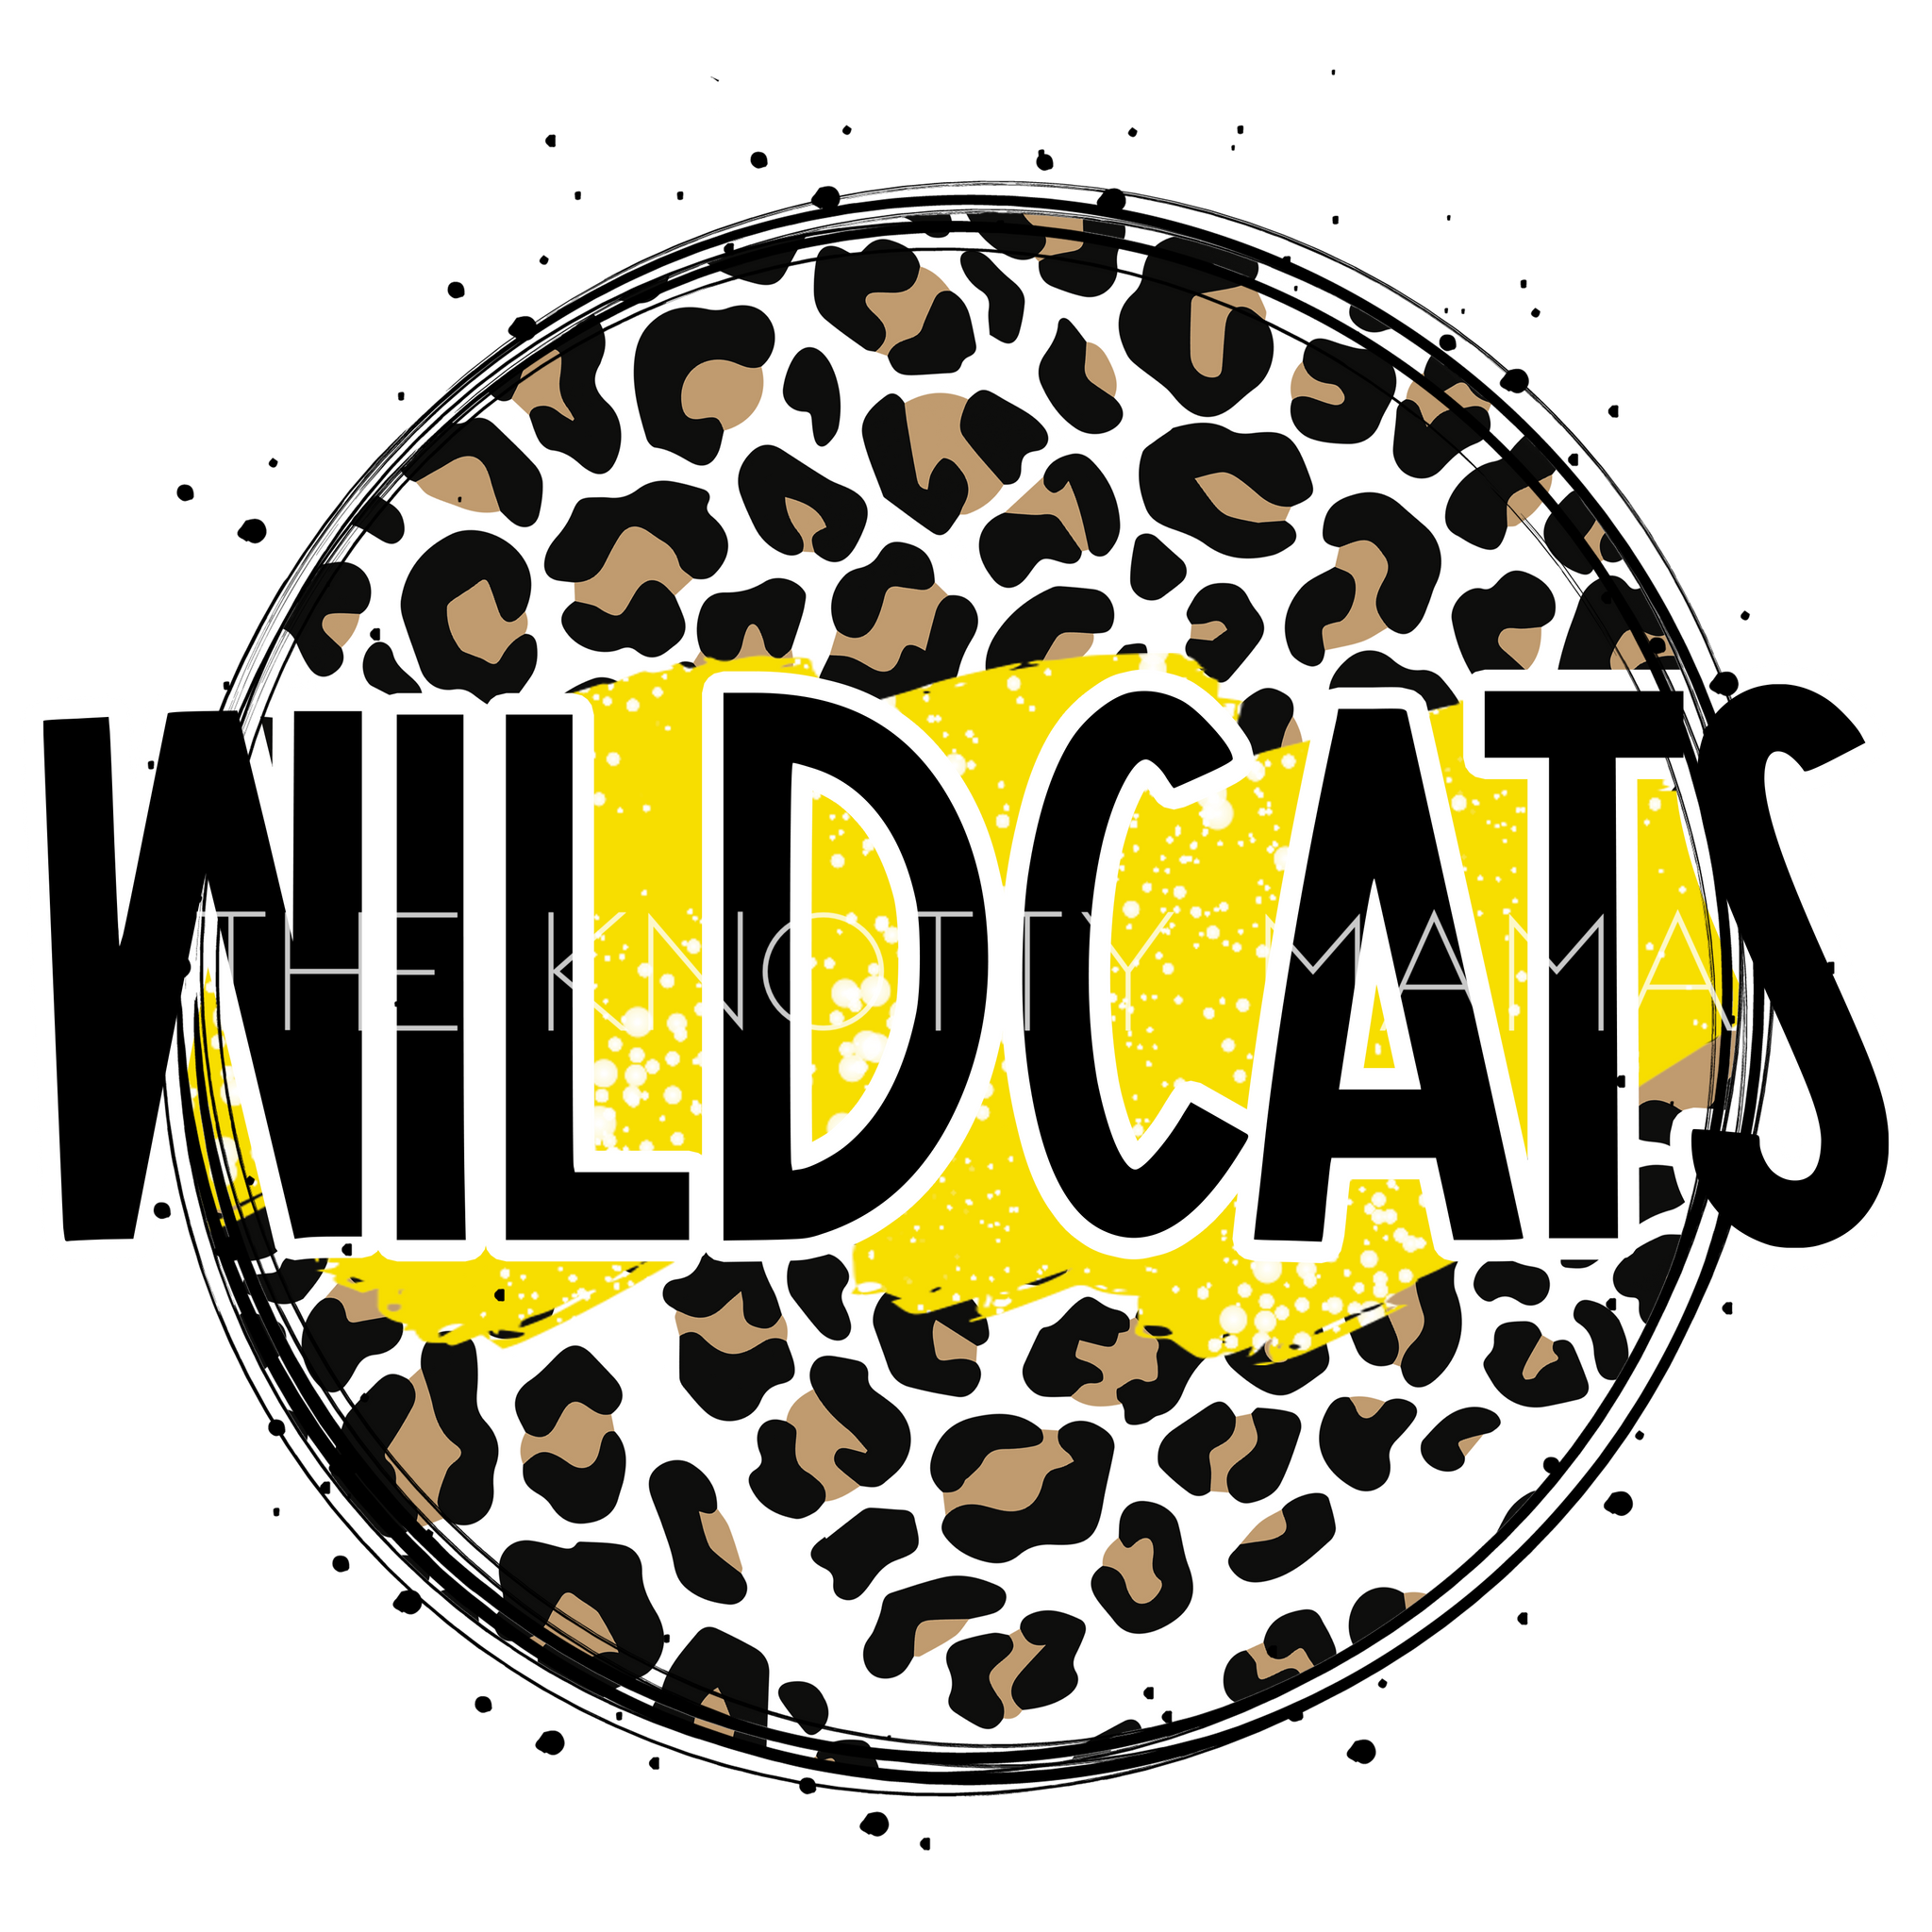 Wildcats Yellow - Leopard Circle PNG